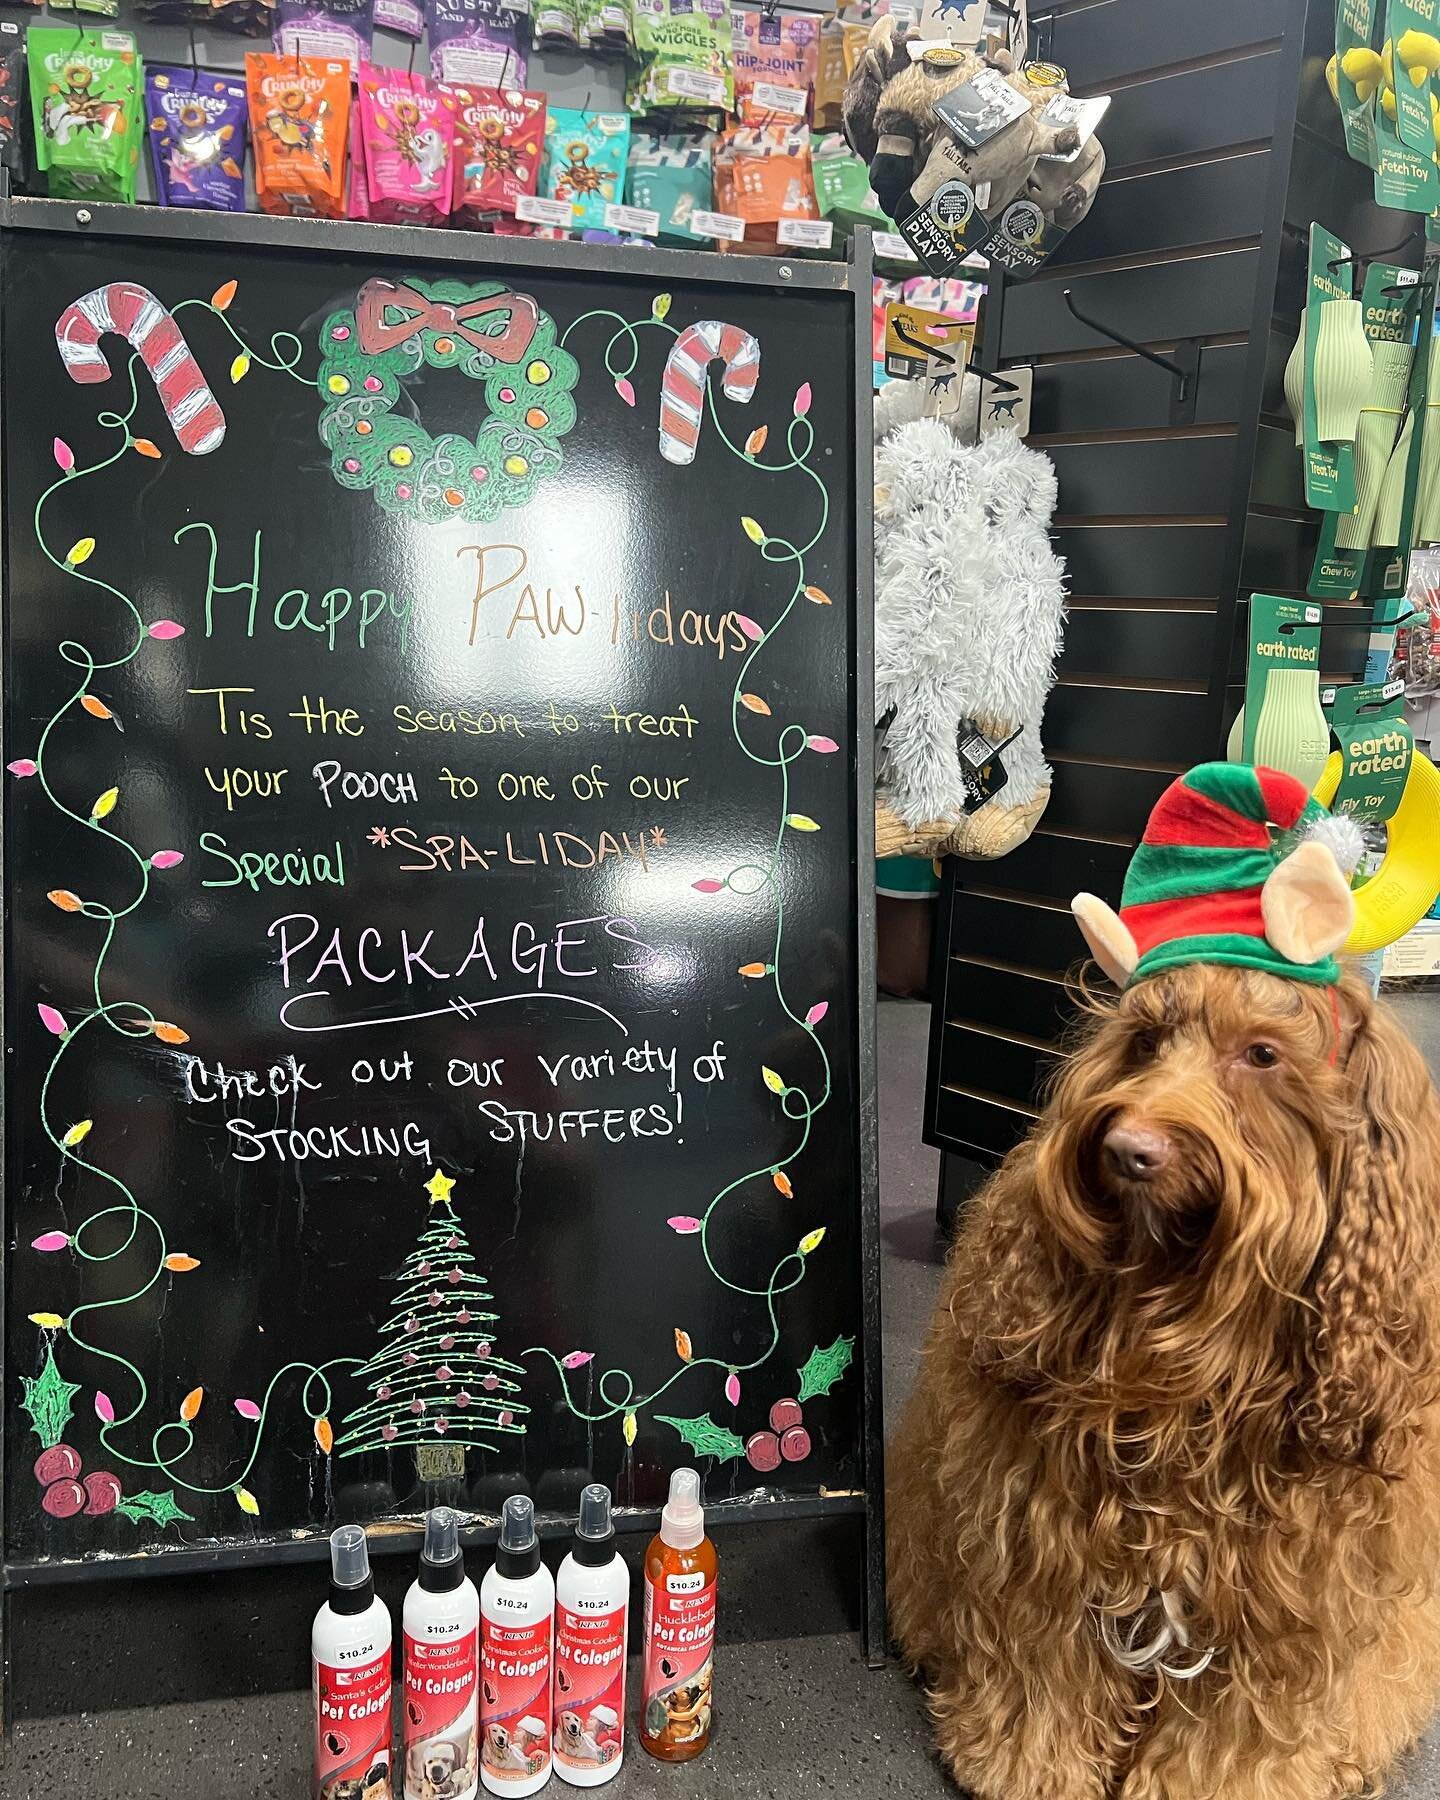 Nizmo back again for another stocking stuffer find!

Want your pooch smelling  fresh as snow for Santa Paws? Stop in for a variety of spectacular holiday scents, such as Winter Wonderland, Christmas Cookie or Santa&rsquo;s Cider! Your sweet little su